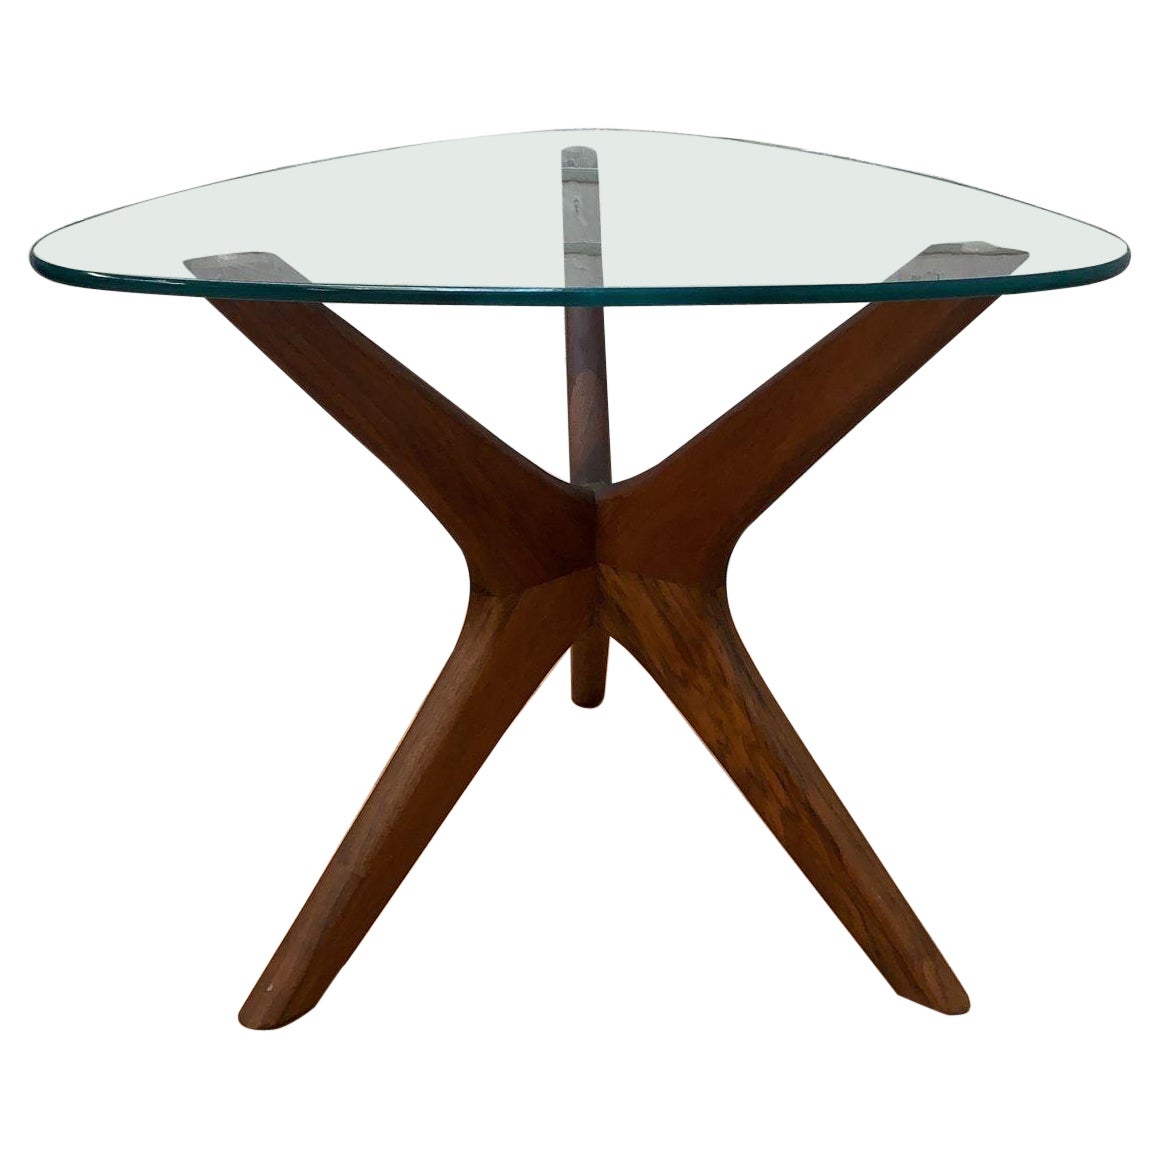 Table d'appoint Adrian Pearsall Jacks mi-siècle moderne